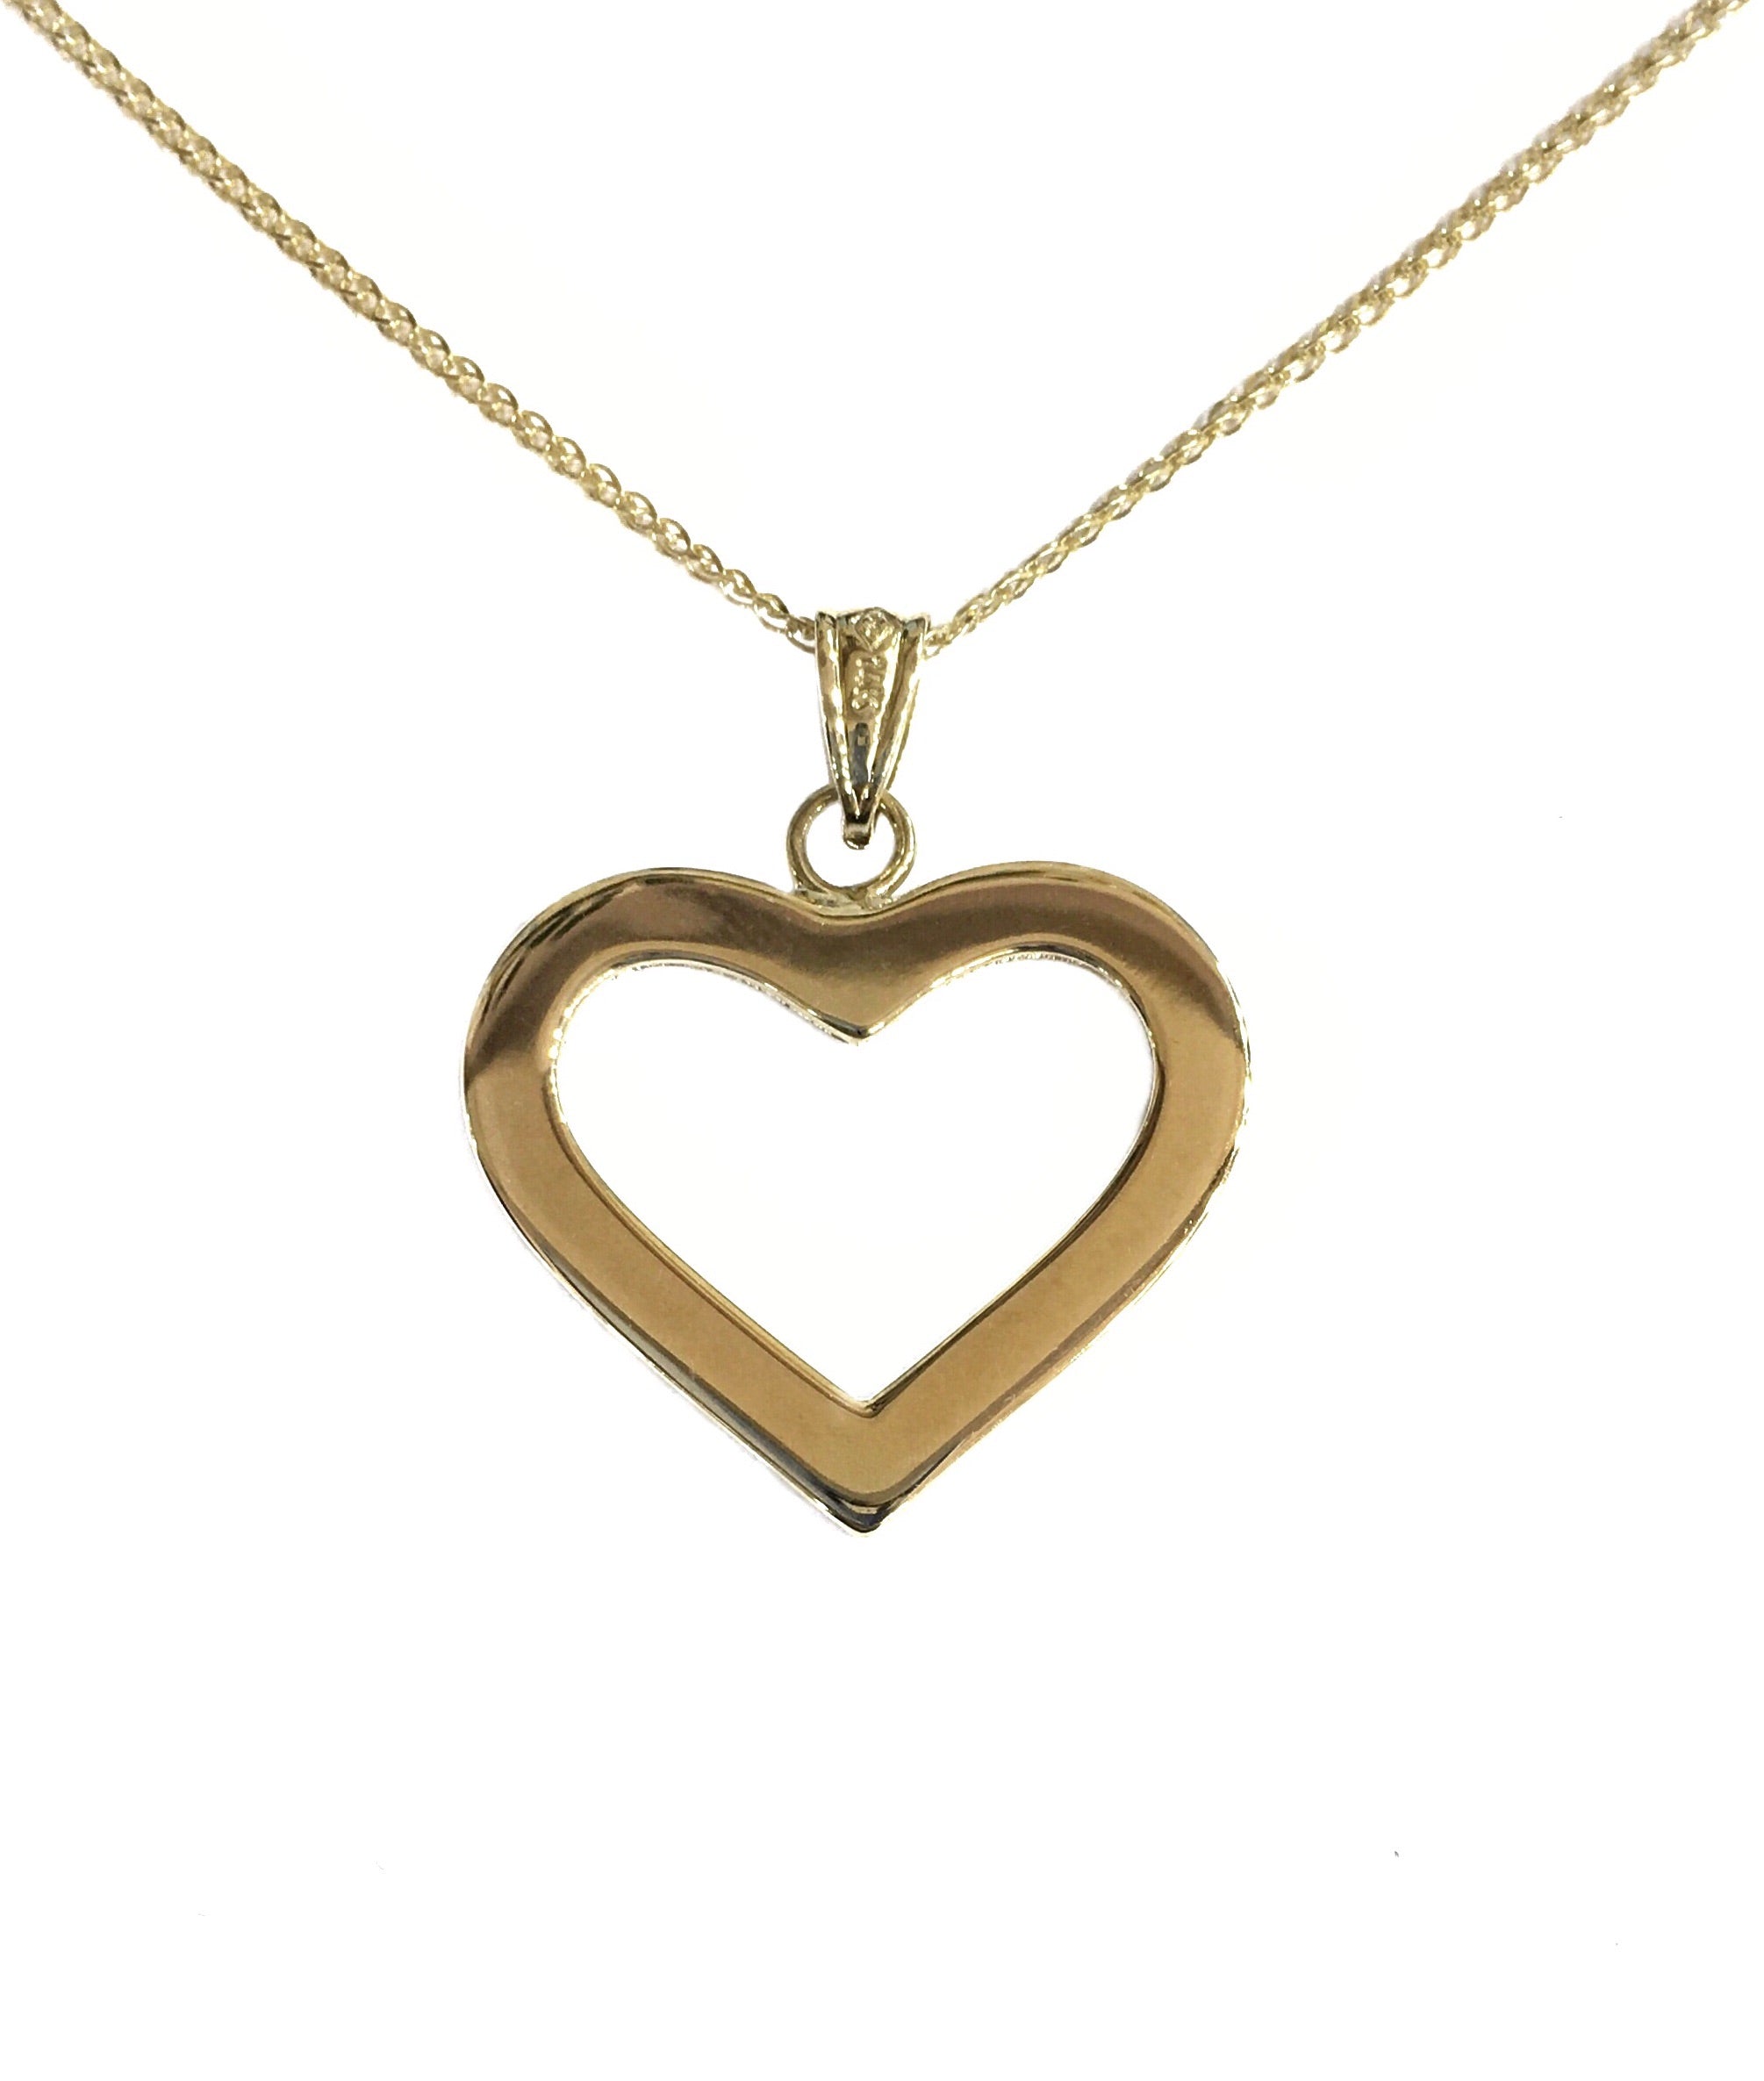 14K YELLOW GOLD POLISHED OUTLINE HEART NECKLACE